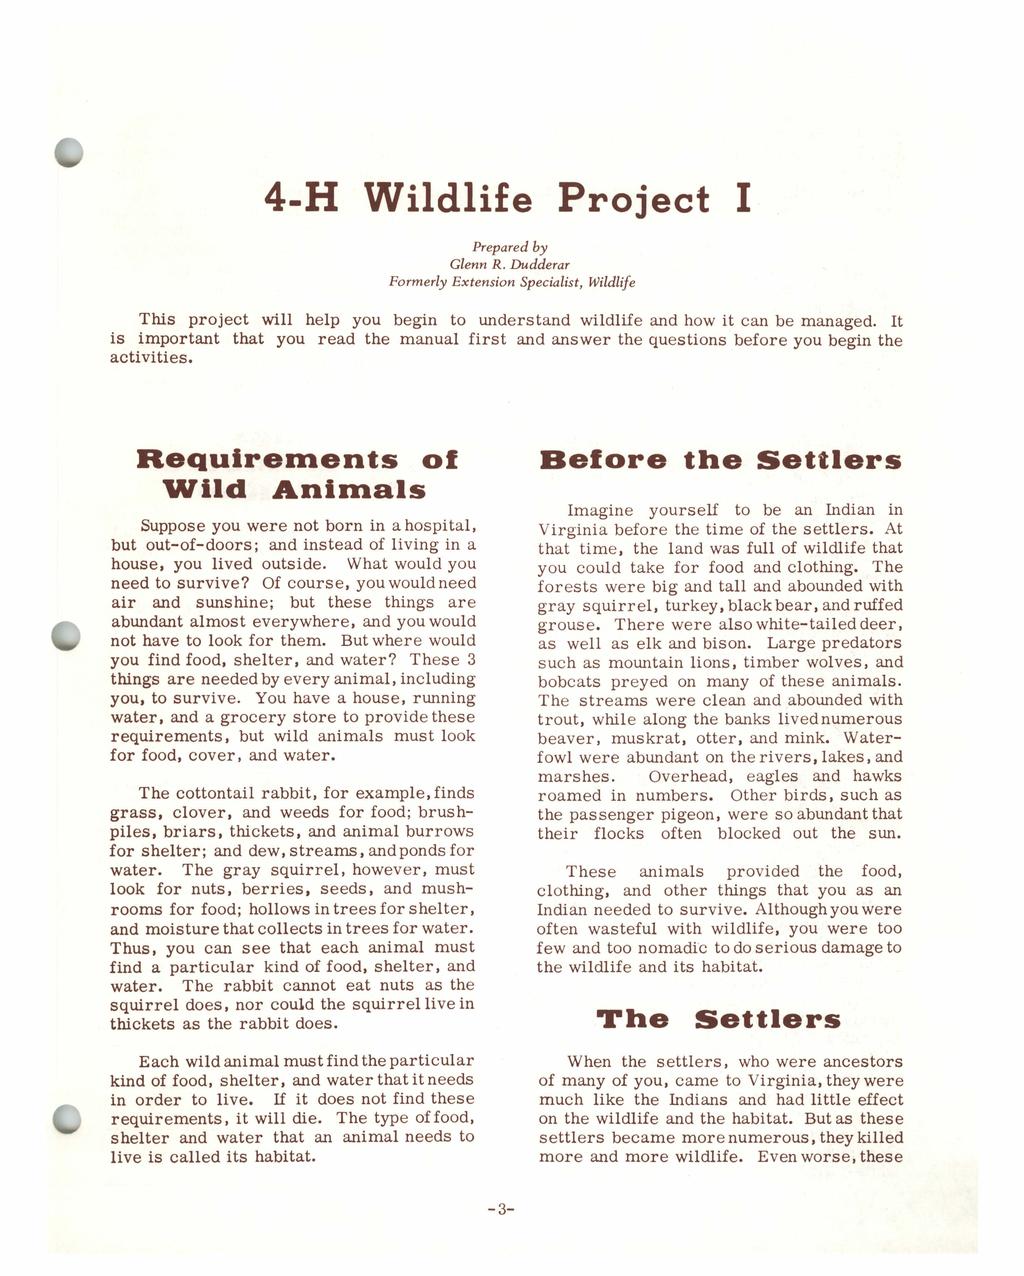 4-H Wildlife Project I. Prepared by Glenn R. Dudderar Formerly Extension Specialist, Wildlife This project will help you begin to understand wildlife and how it can be managed.